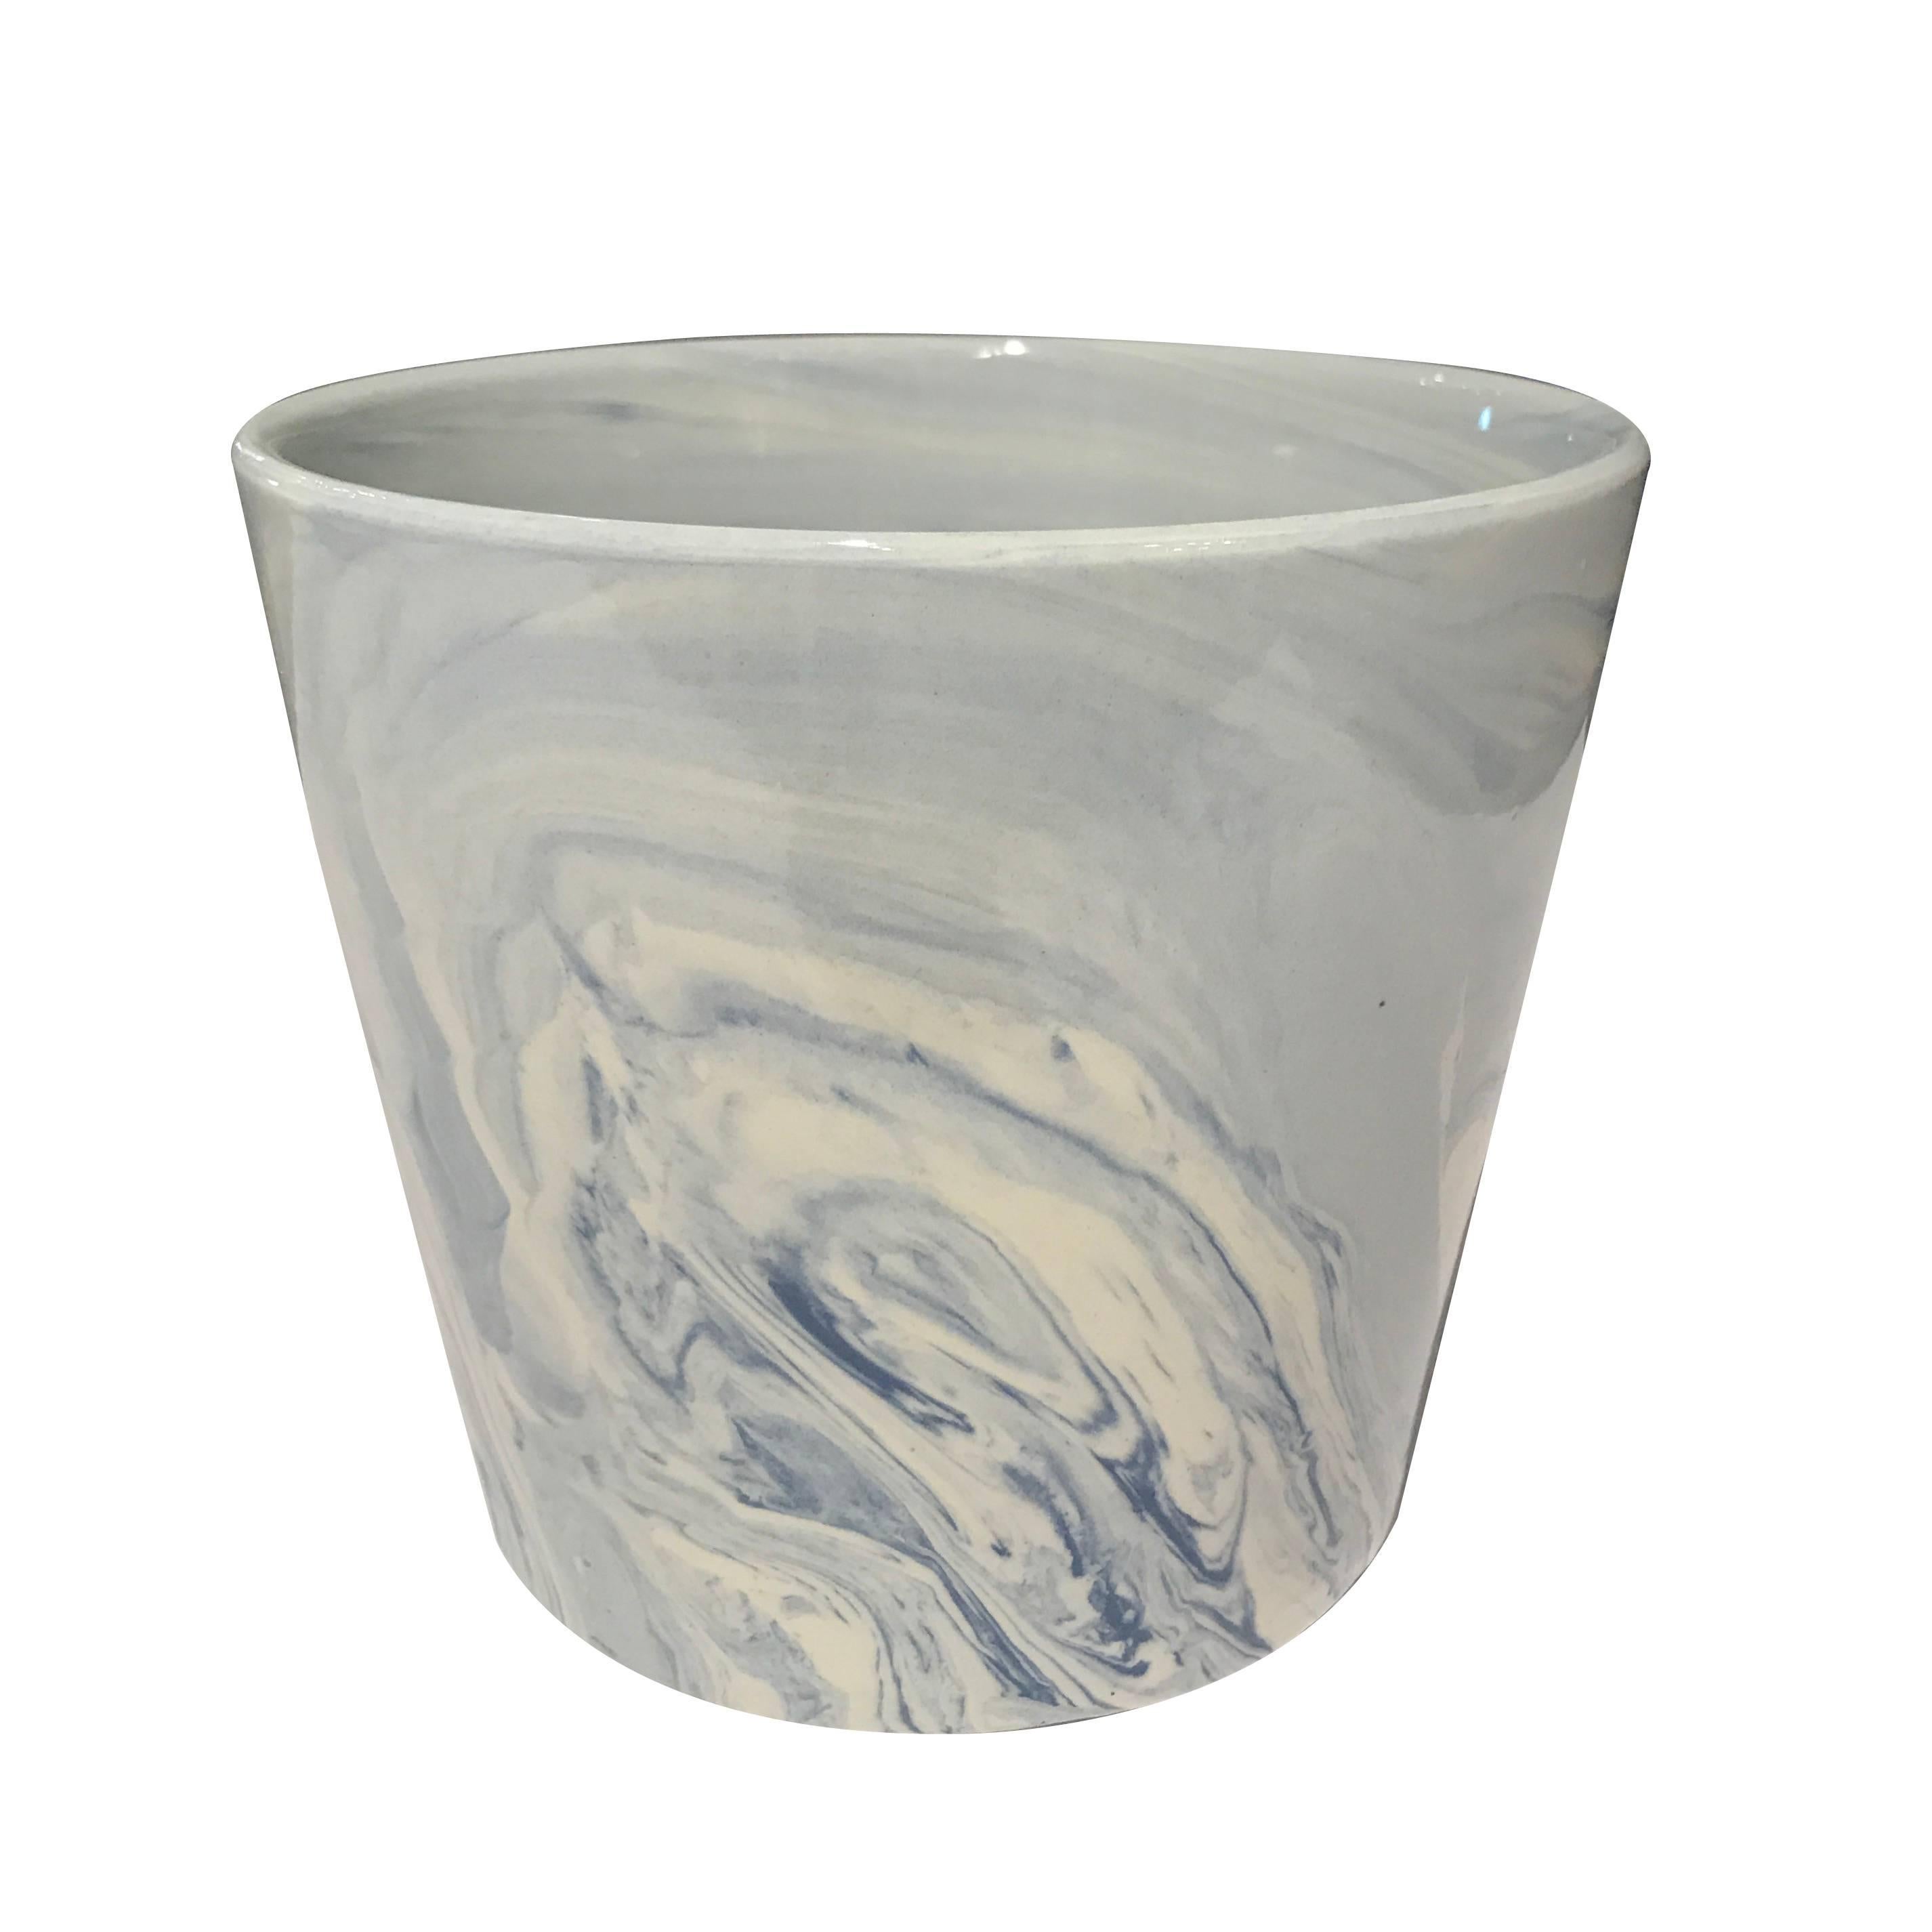 Contemporary Chinese collection of blue and white marbleized ceramic pots in small, medium and large sizes.
Sold individually
Measures: Small 5